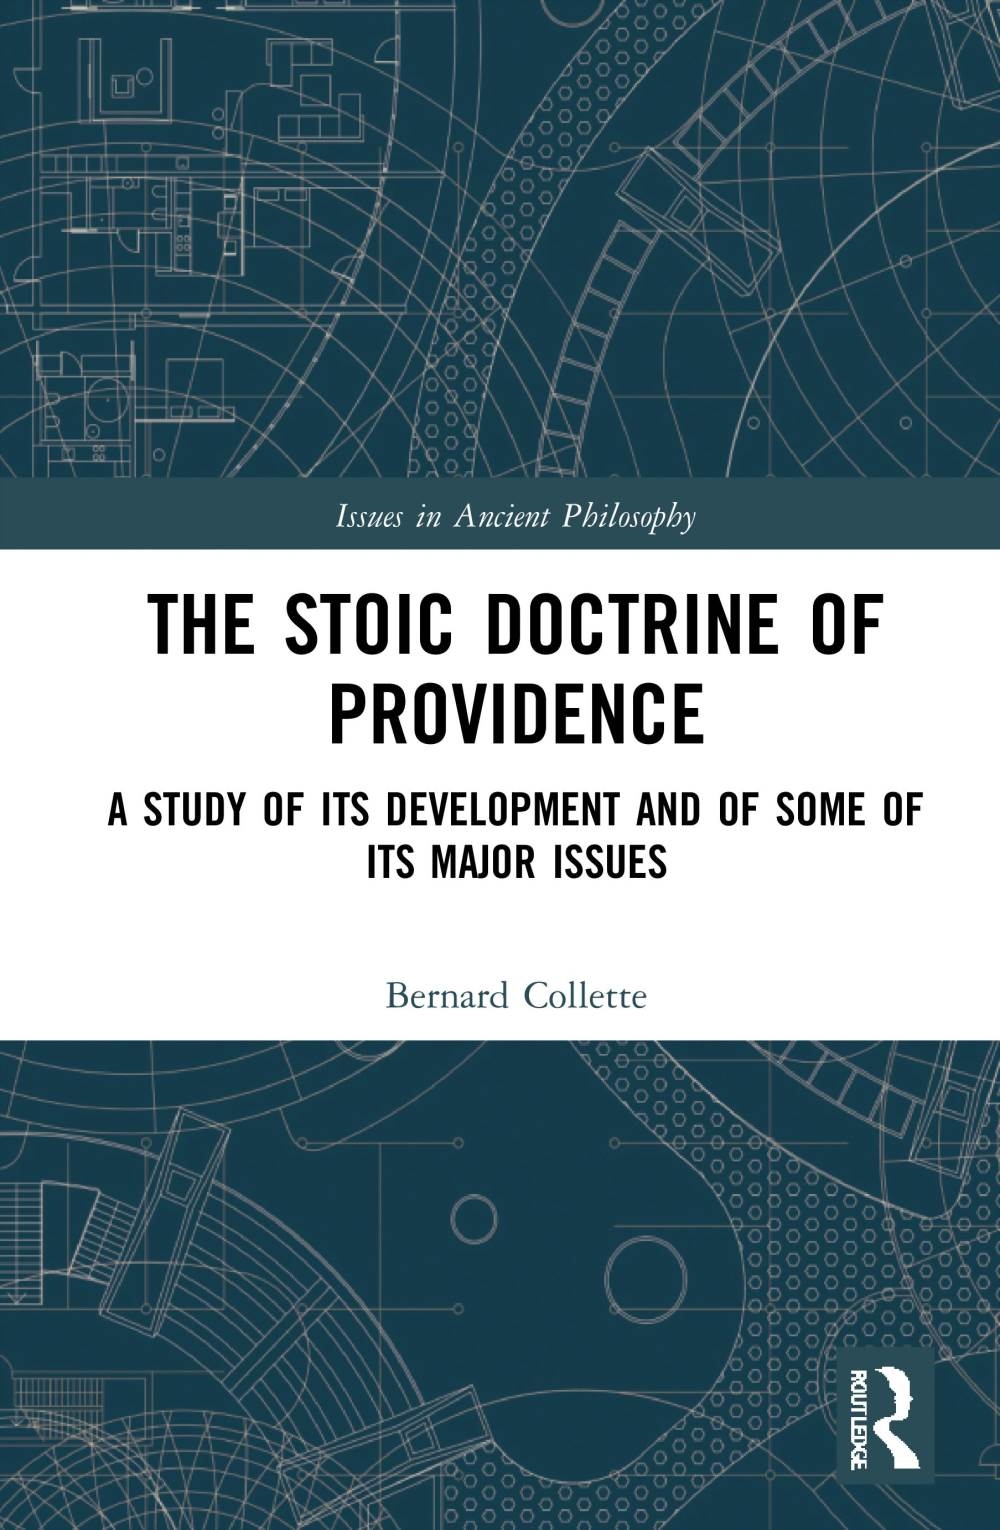 The Stoic Doctrine of Providence: A Study of Its Development and of Some of Its Major Issues